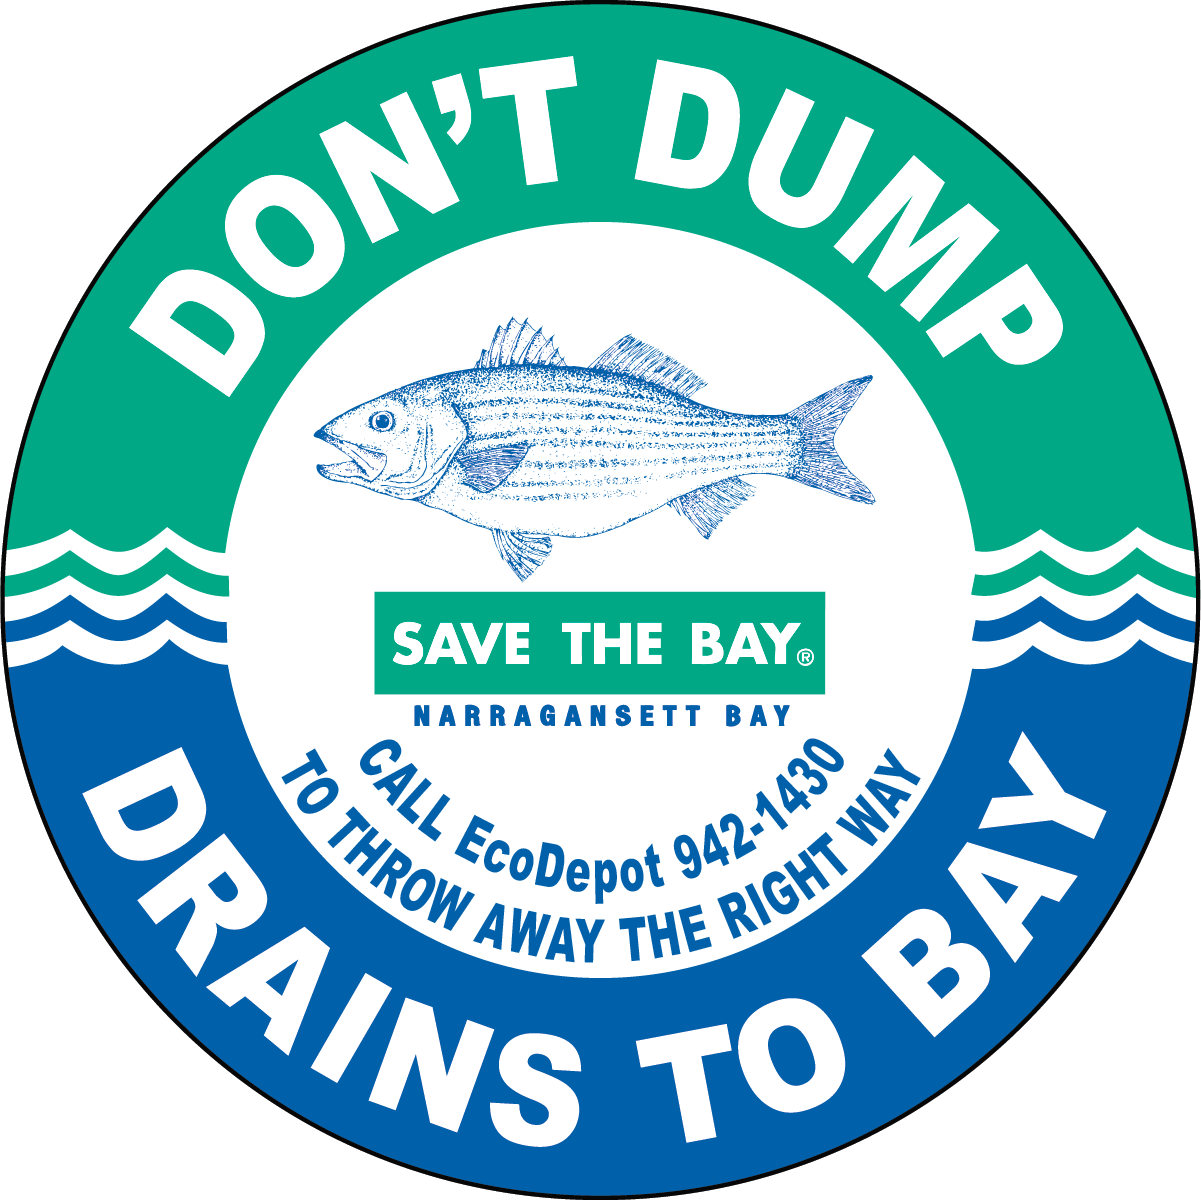 Save-The-Bay-Dont-dump-drains-to-bay